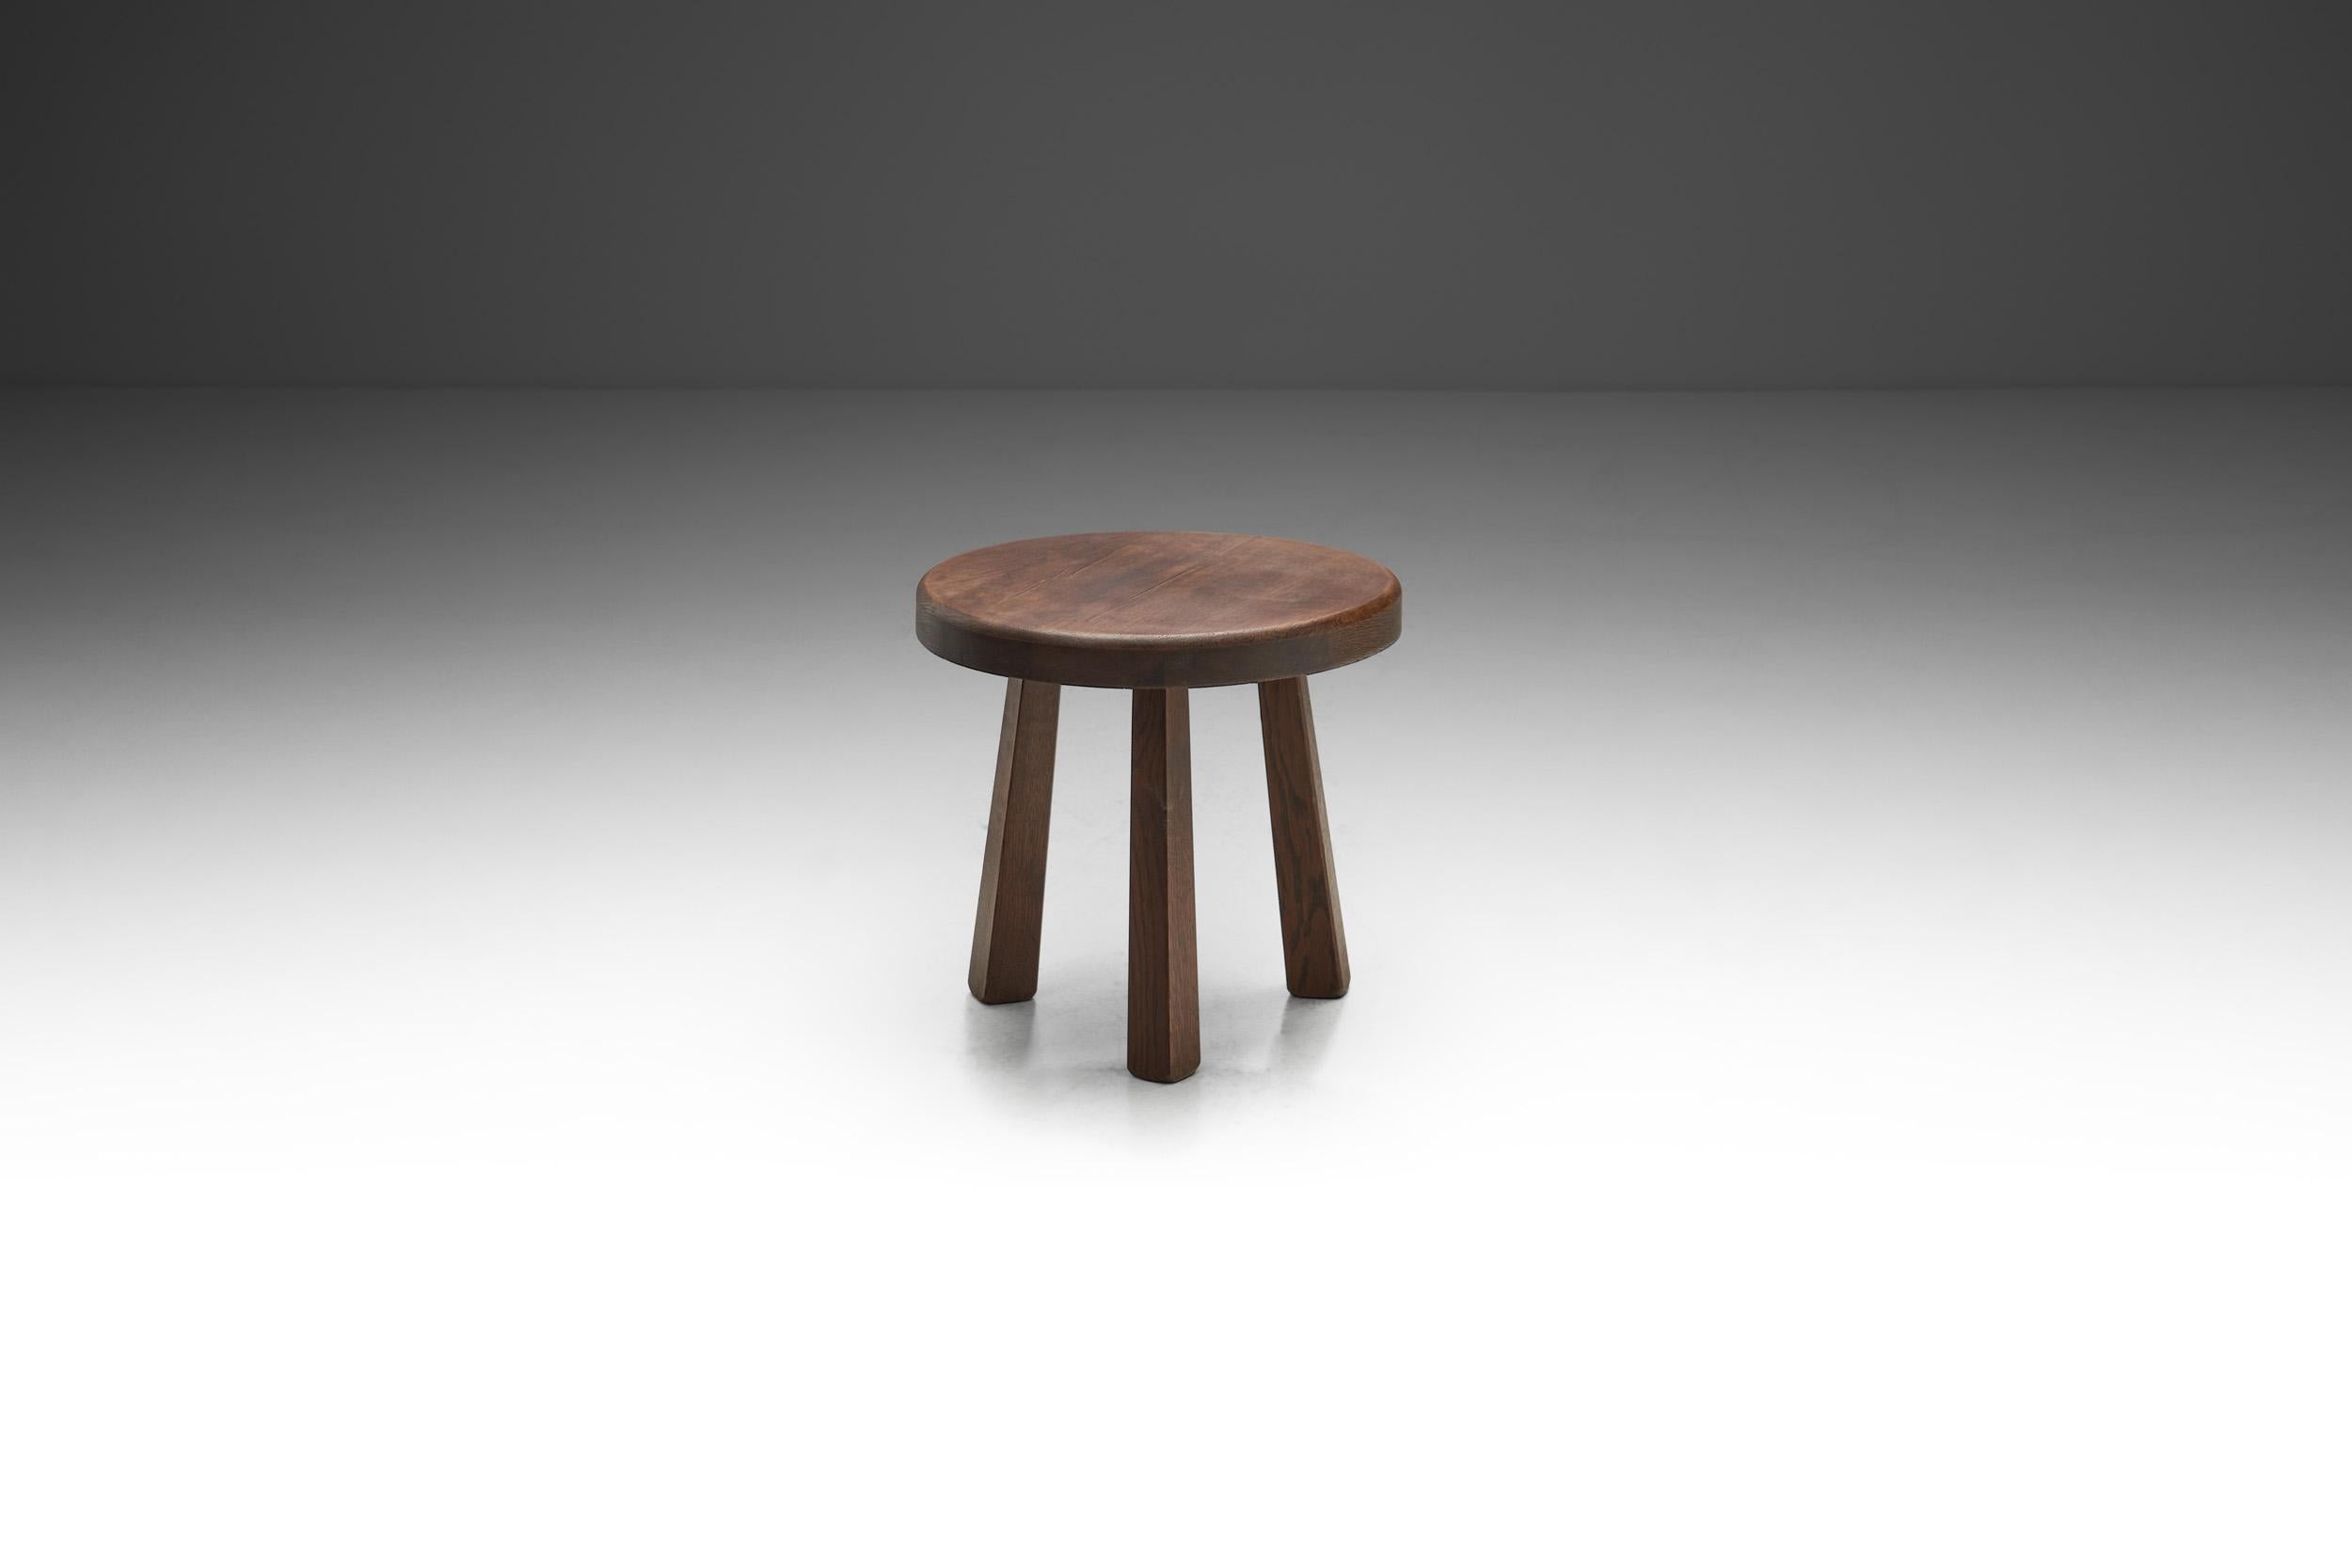 The design of this European stool is characterized by a minimal, clean approach that seeks to combine functionality with beauty. Its focus is on simple lines and light spaces, devoid of clutter. Accordingly, form and function collide in this